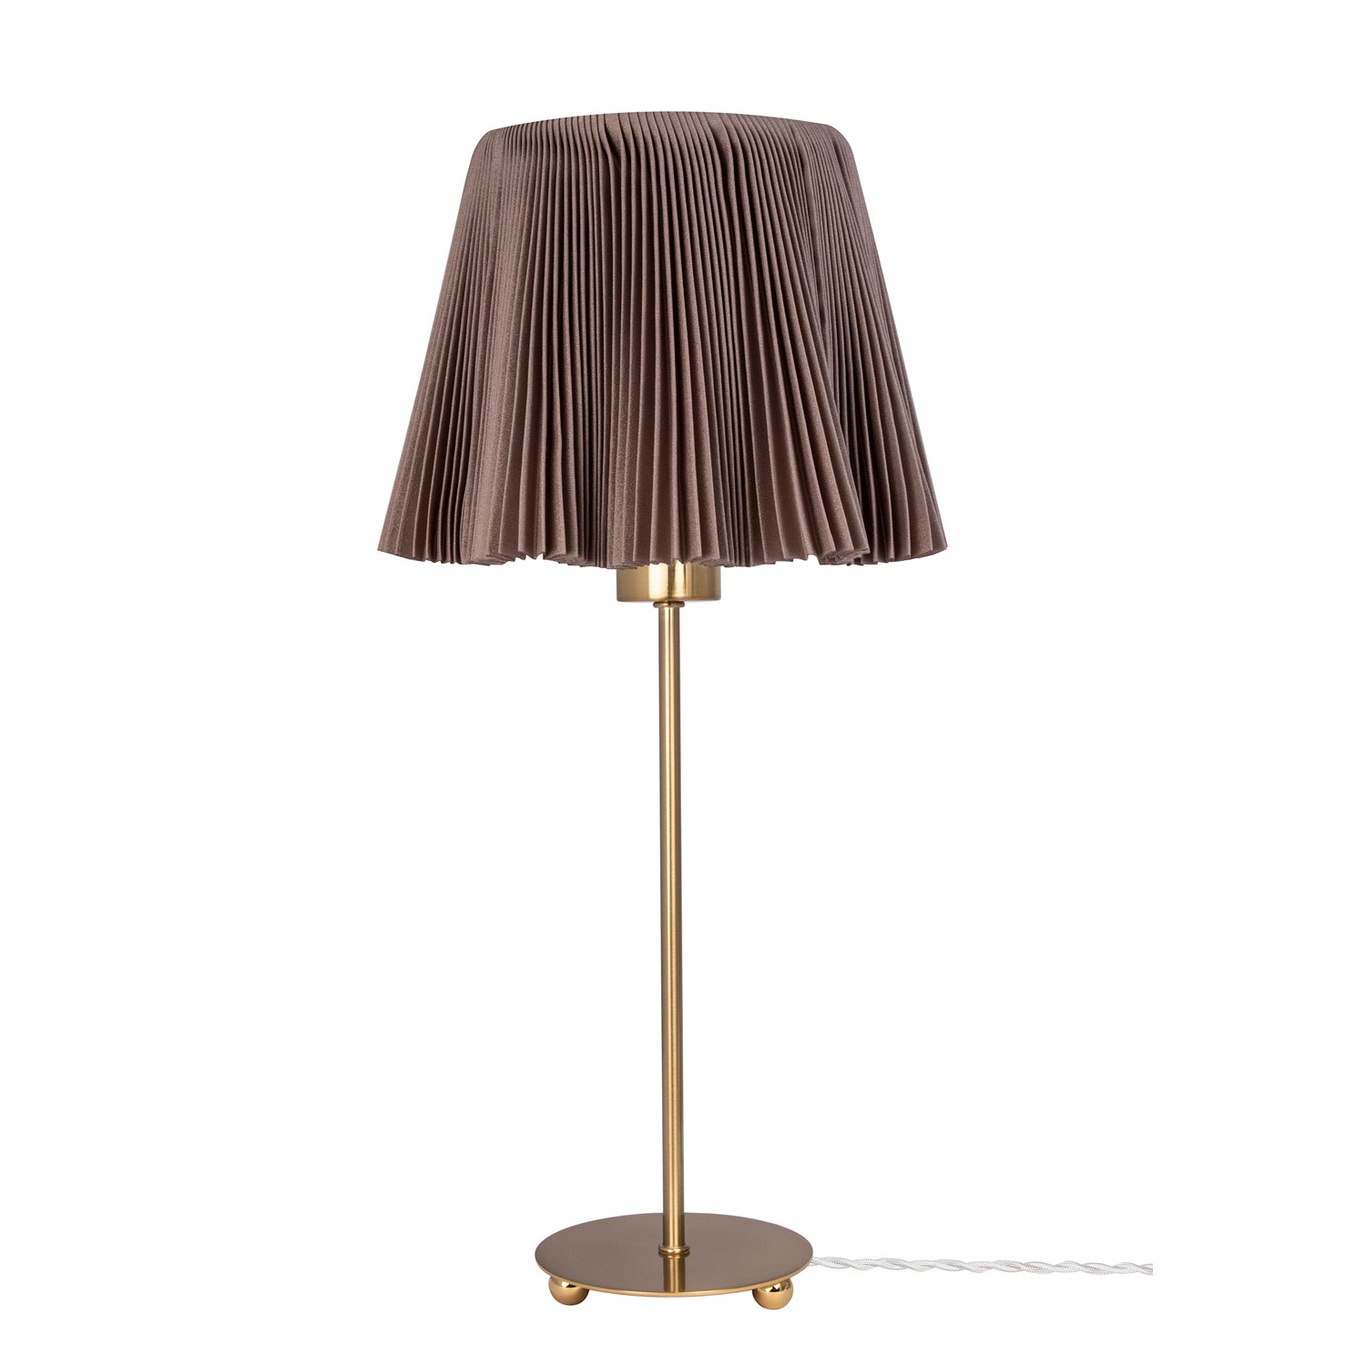 Edith Table Lamp, Brown/Brass